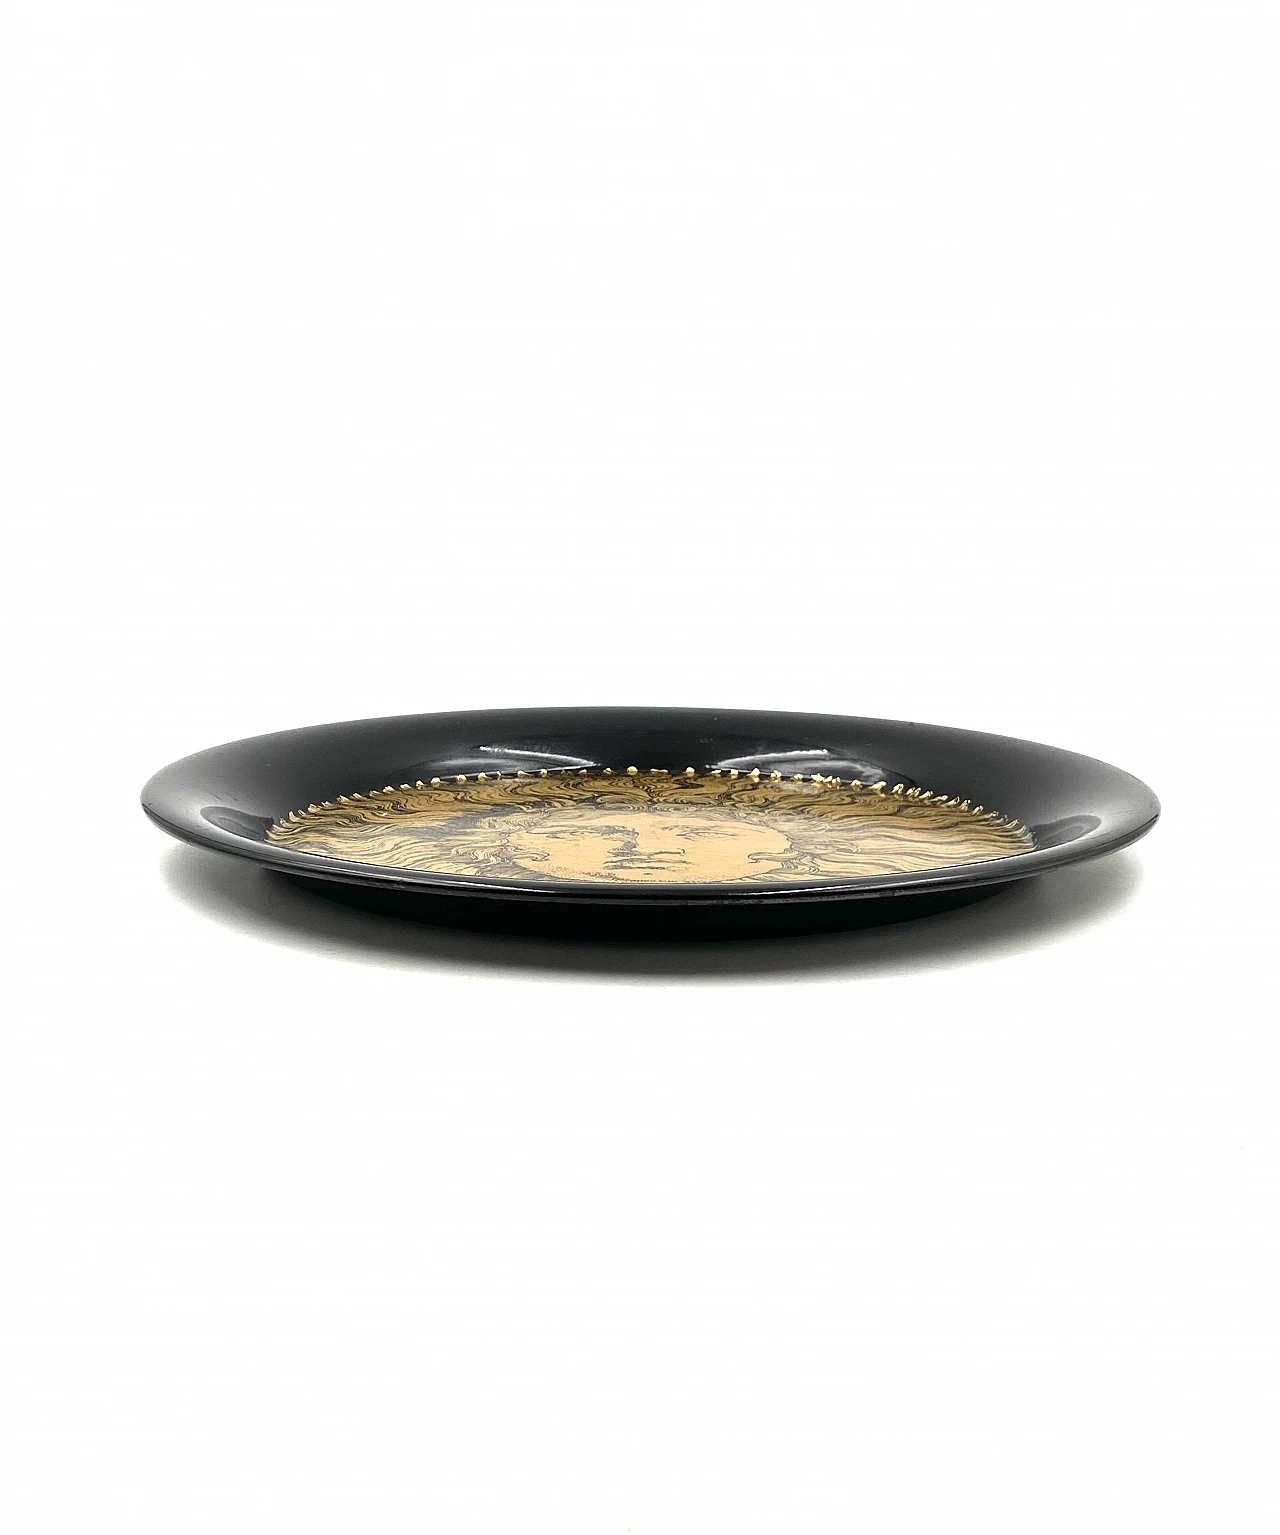 Metal Re Sole tray by Piero Fornasetti, 1950s 19